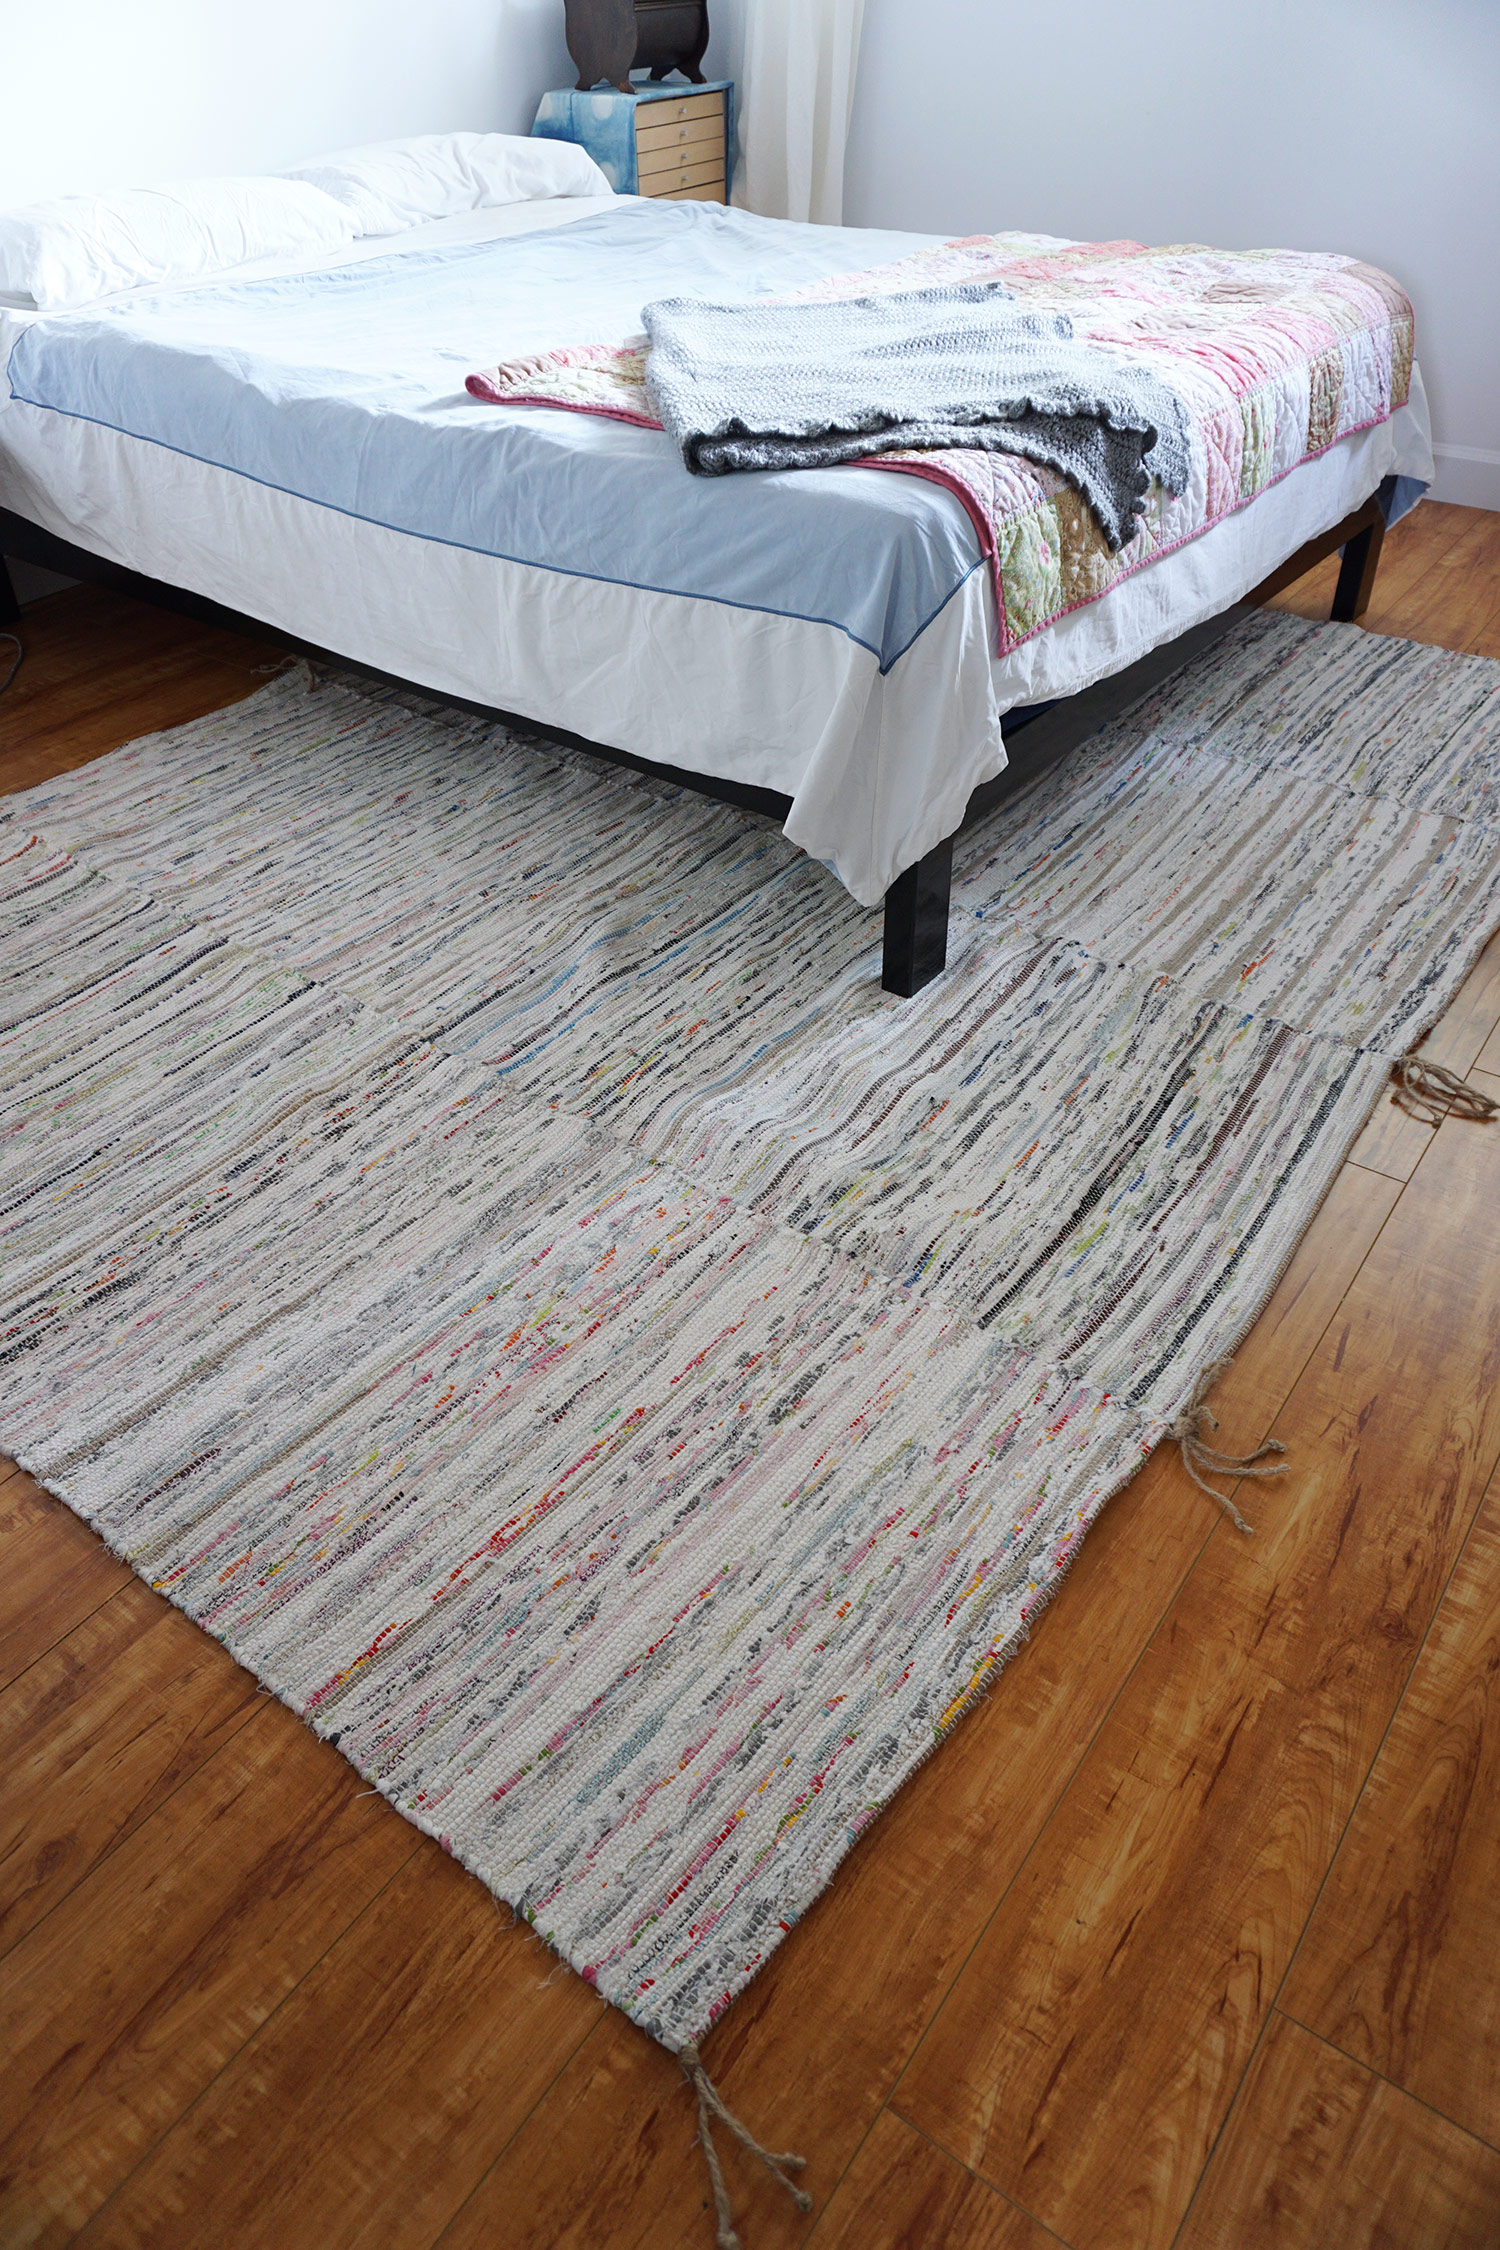 The $7 Hack That Helped My Handmade Rug Look Perfect